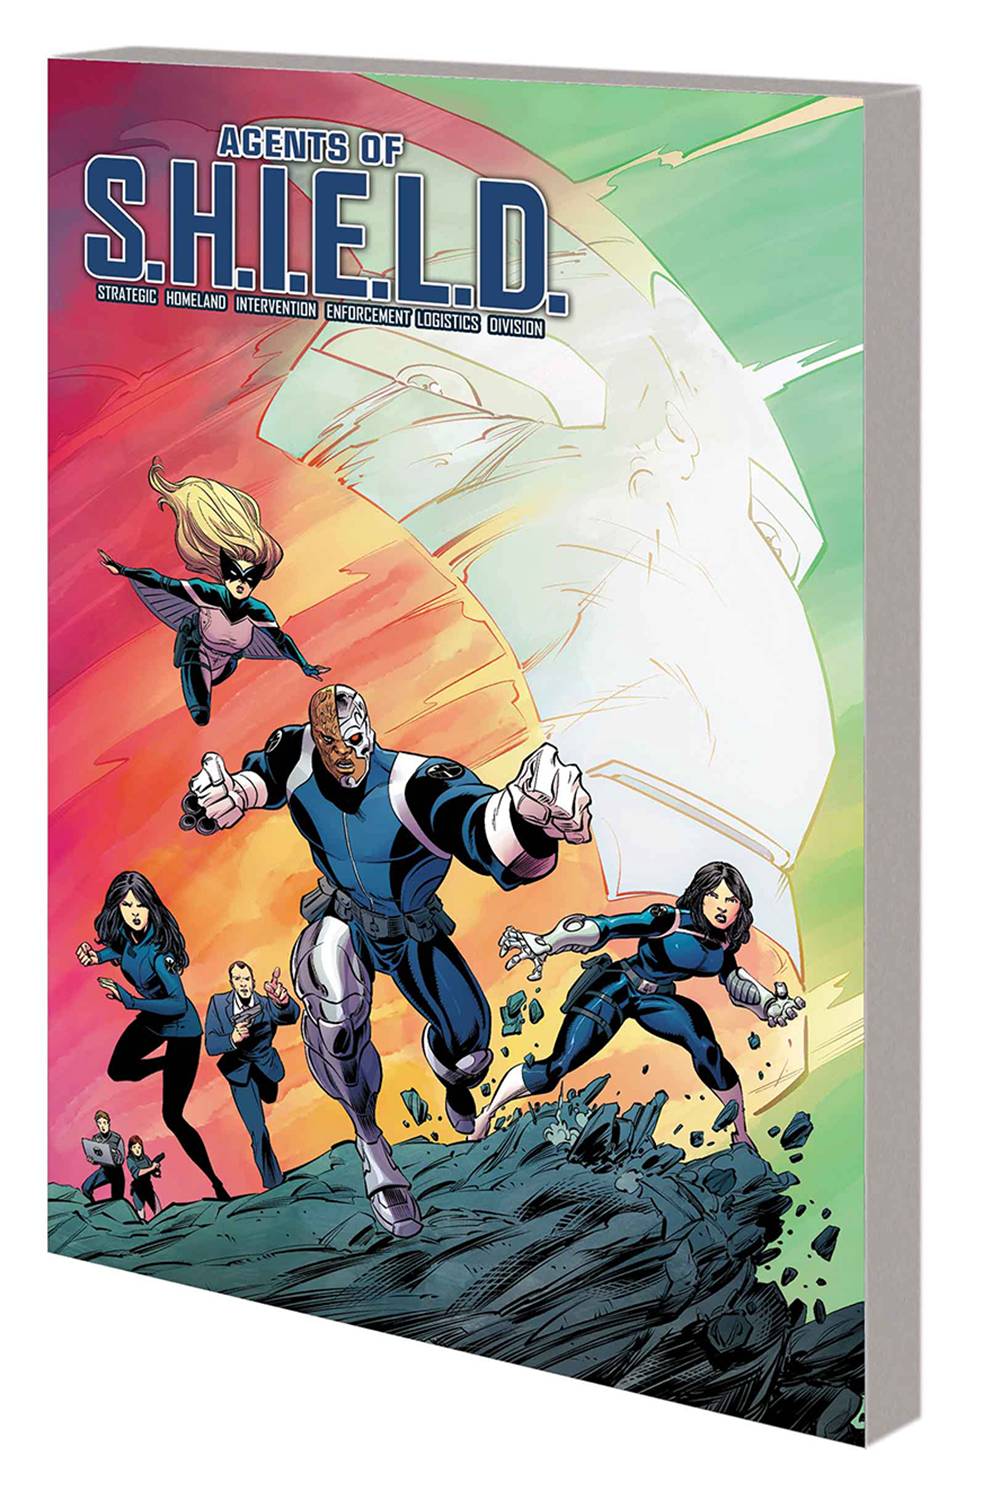 Agents of Shield Graphic Novel Volume 1 Coulson Protocols